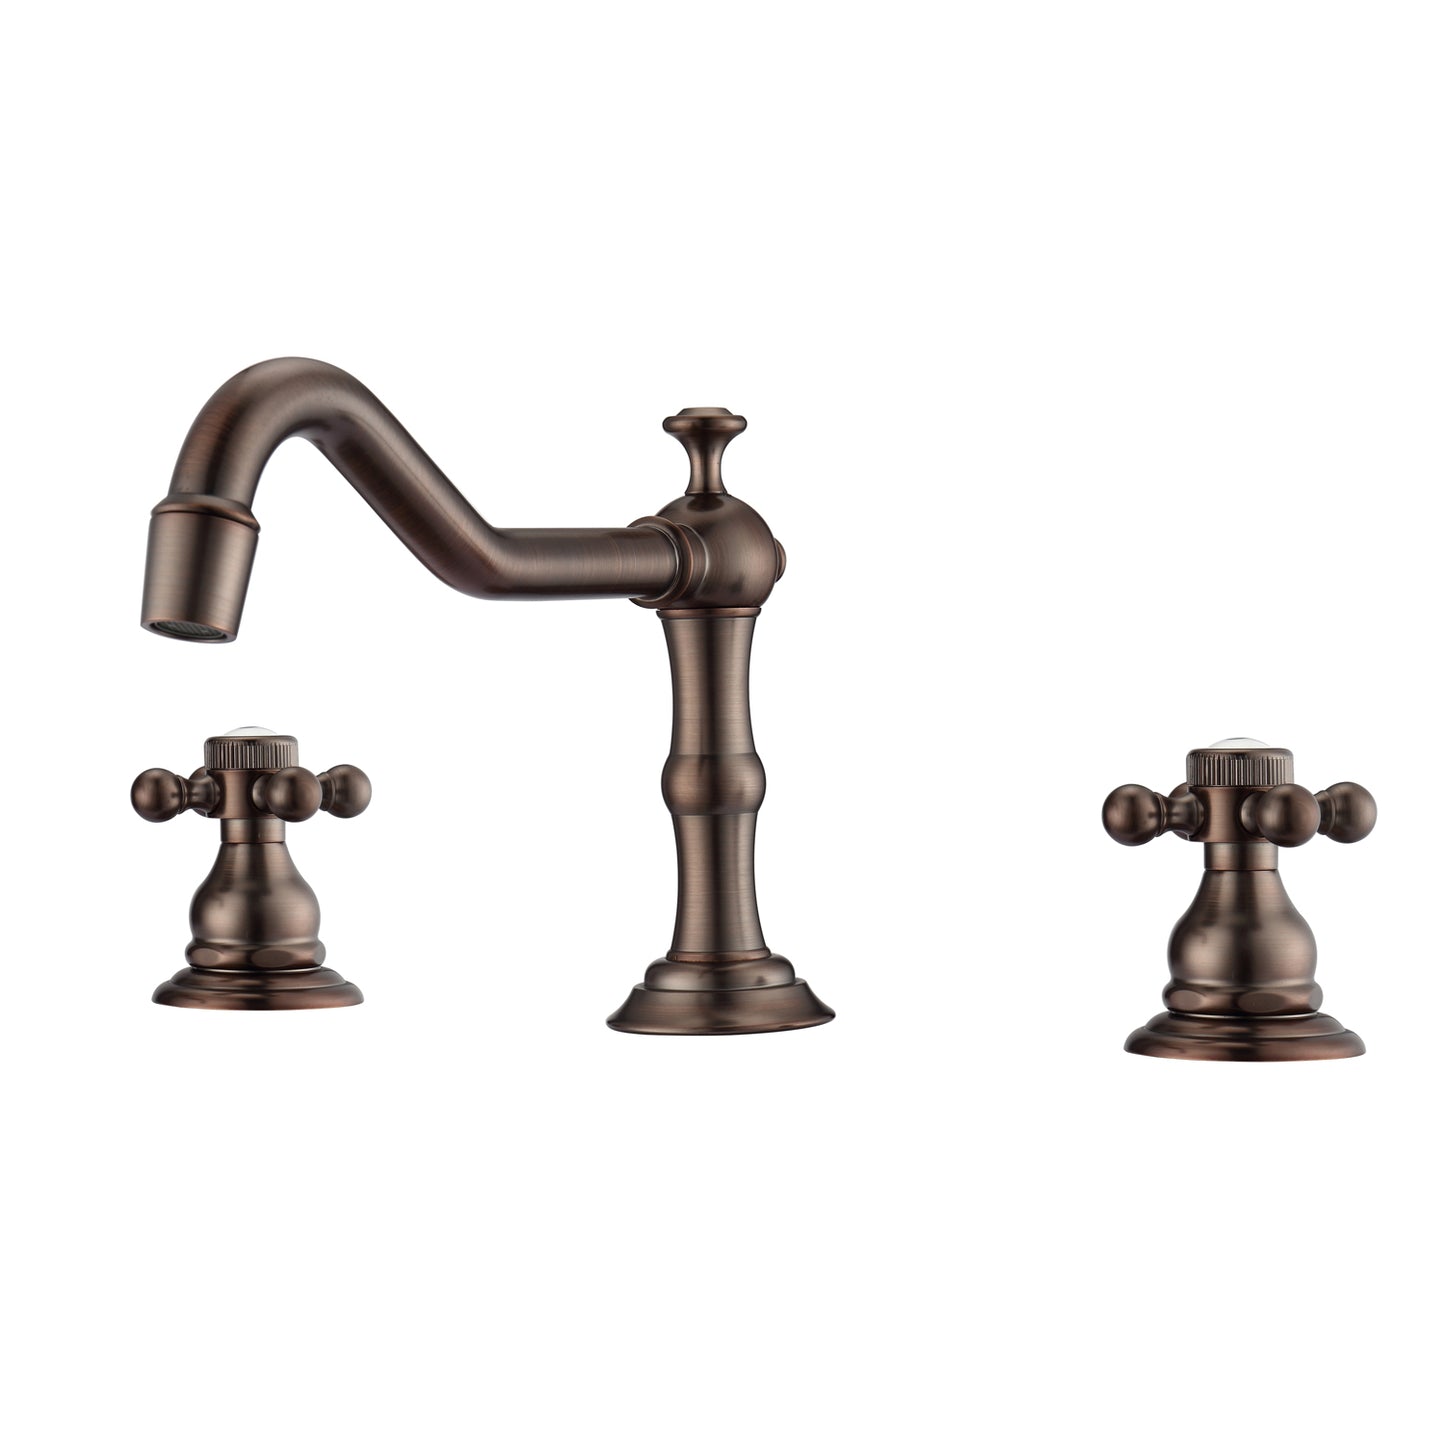 Roma 8" Widespread Oil Rubbed Bronze Bathroom Faucet with Button Cross Handles